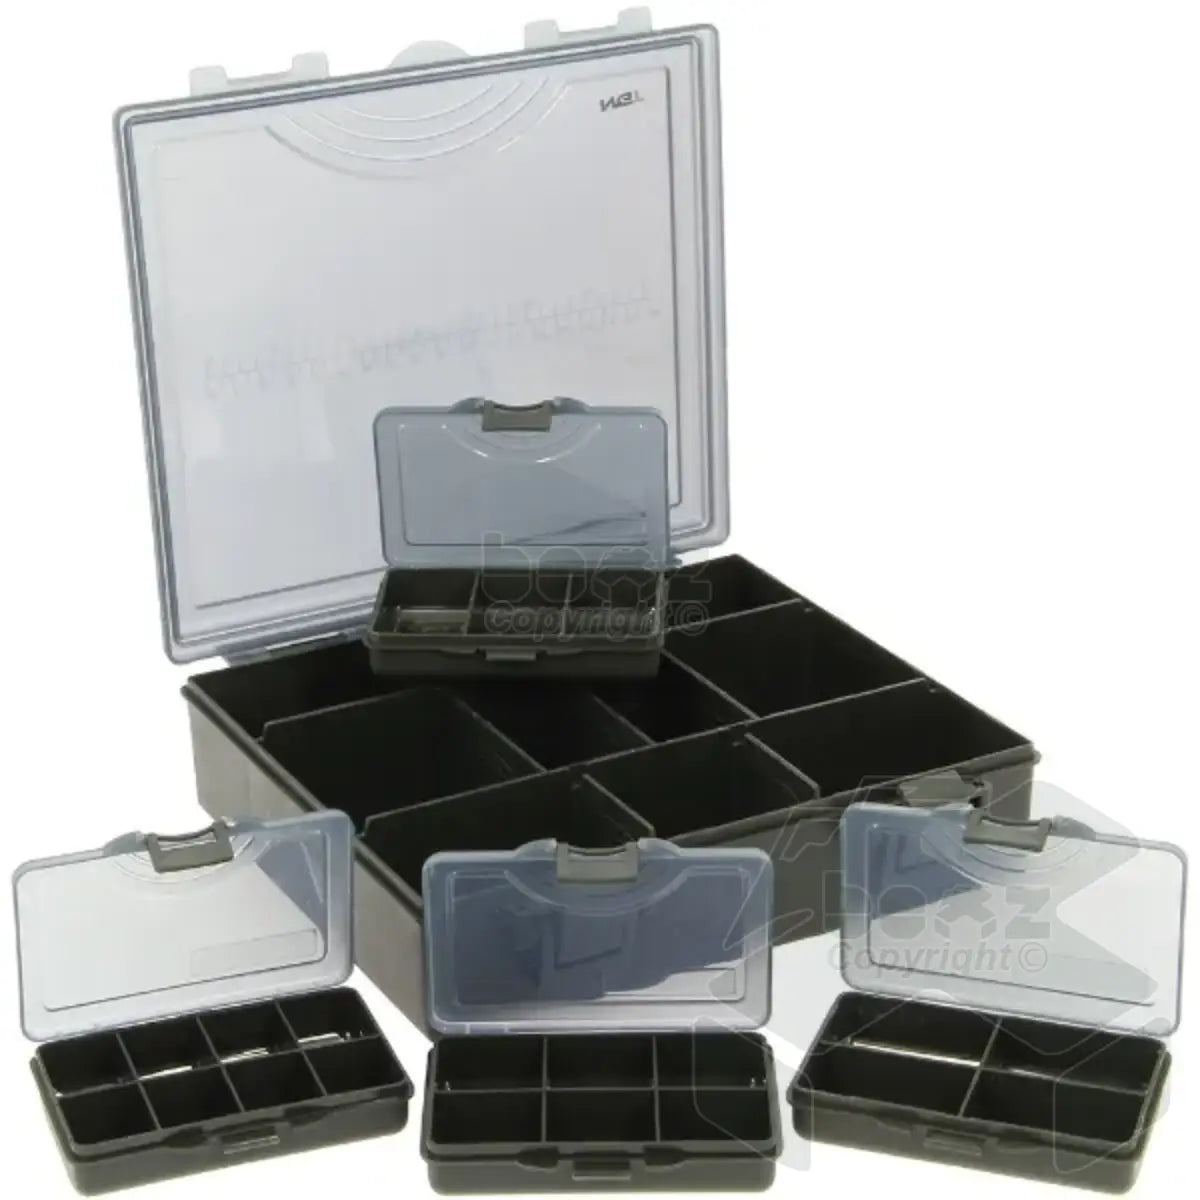 NGT Boxes 4+1 Tackle Box - Tackle Box with 4 Bit